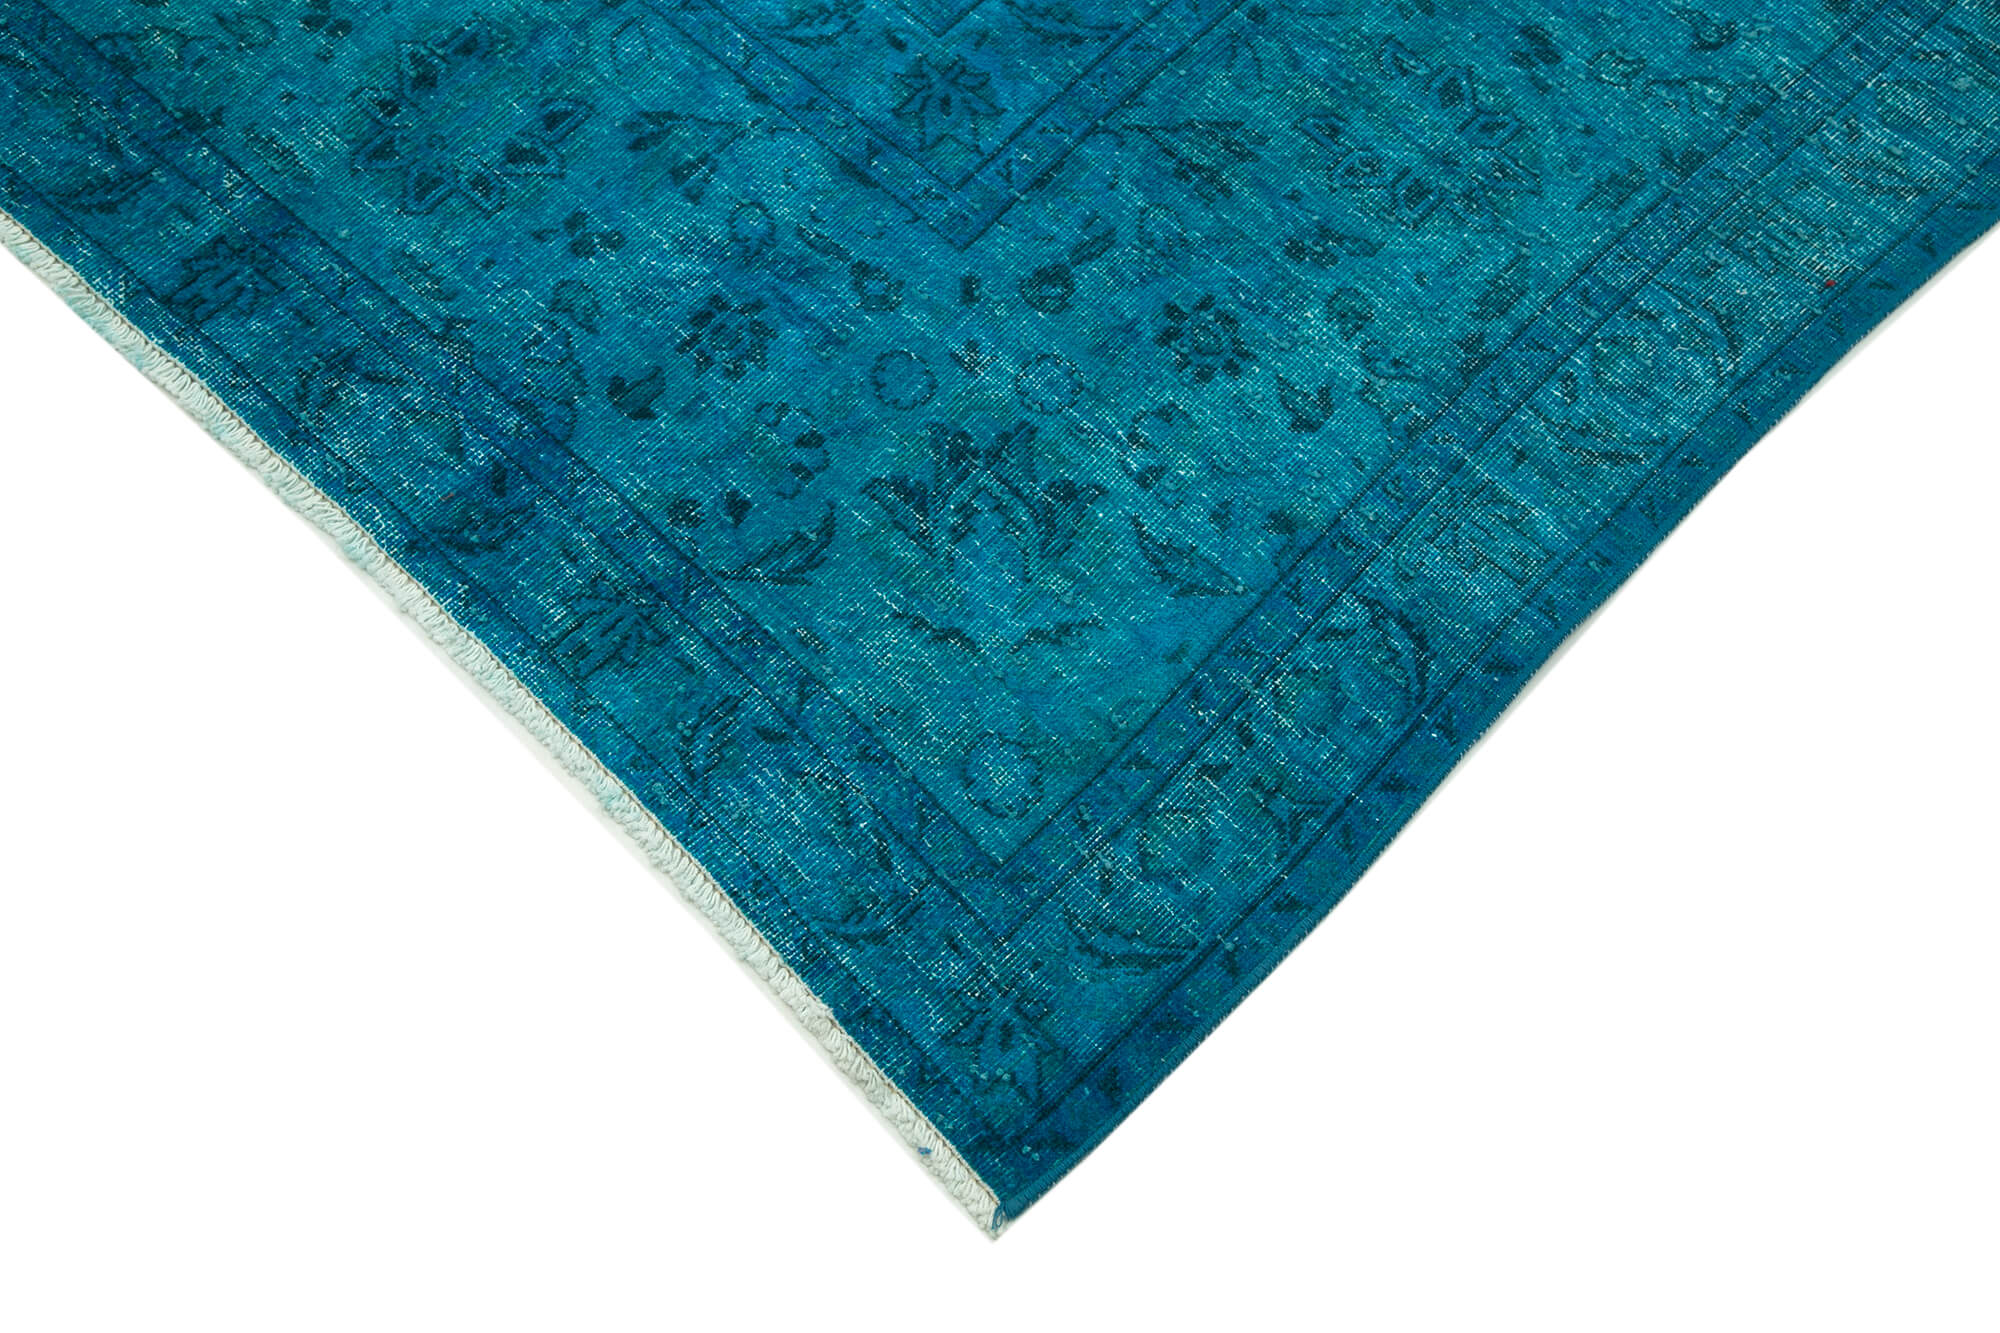 Turquoise Area Rugs For Living Room